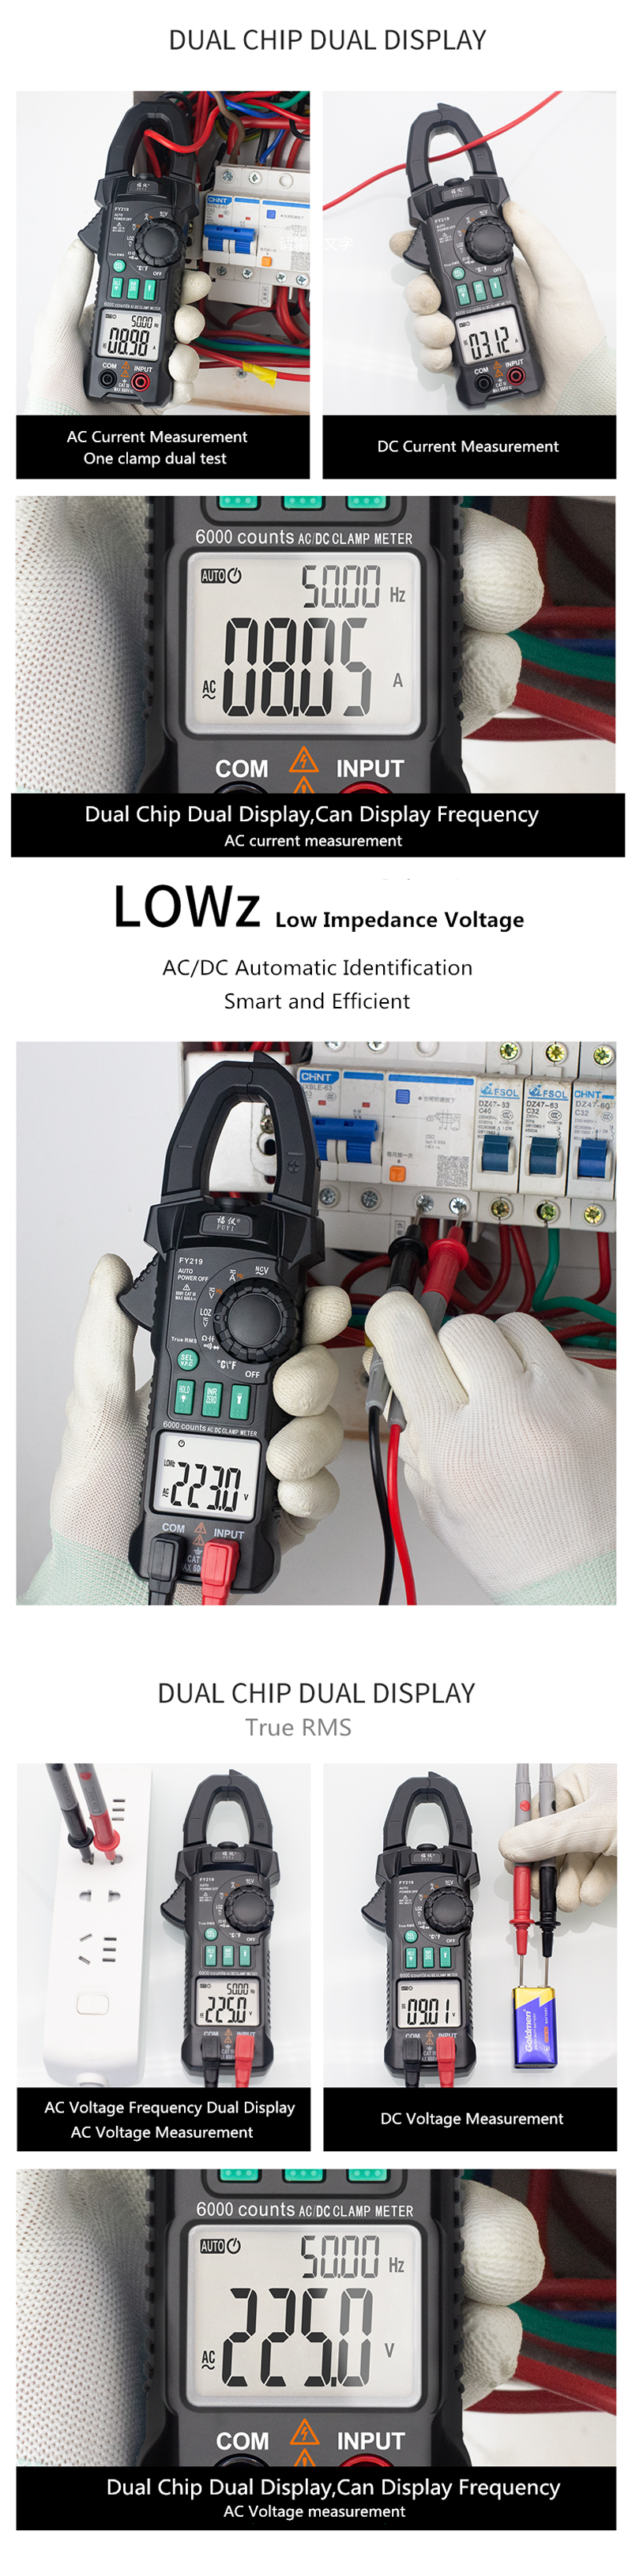 FUYI-FY219-Double-Display-ACDC-True-RMS-Digital-Clamp-Meter-Portable-Multimeter-Voltage-Current-Mete-1627563-2